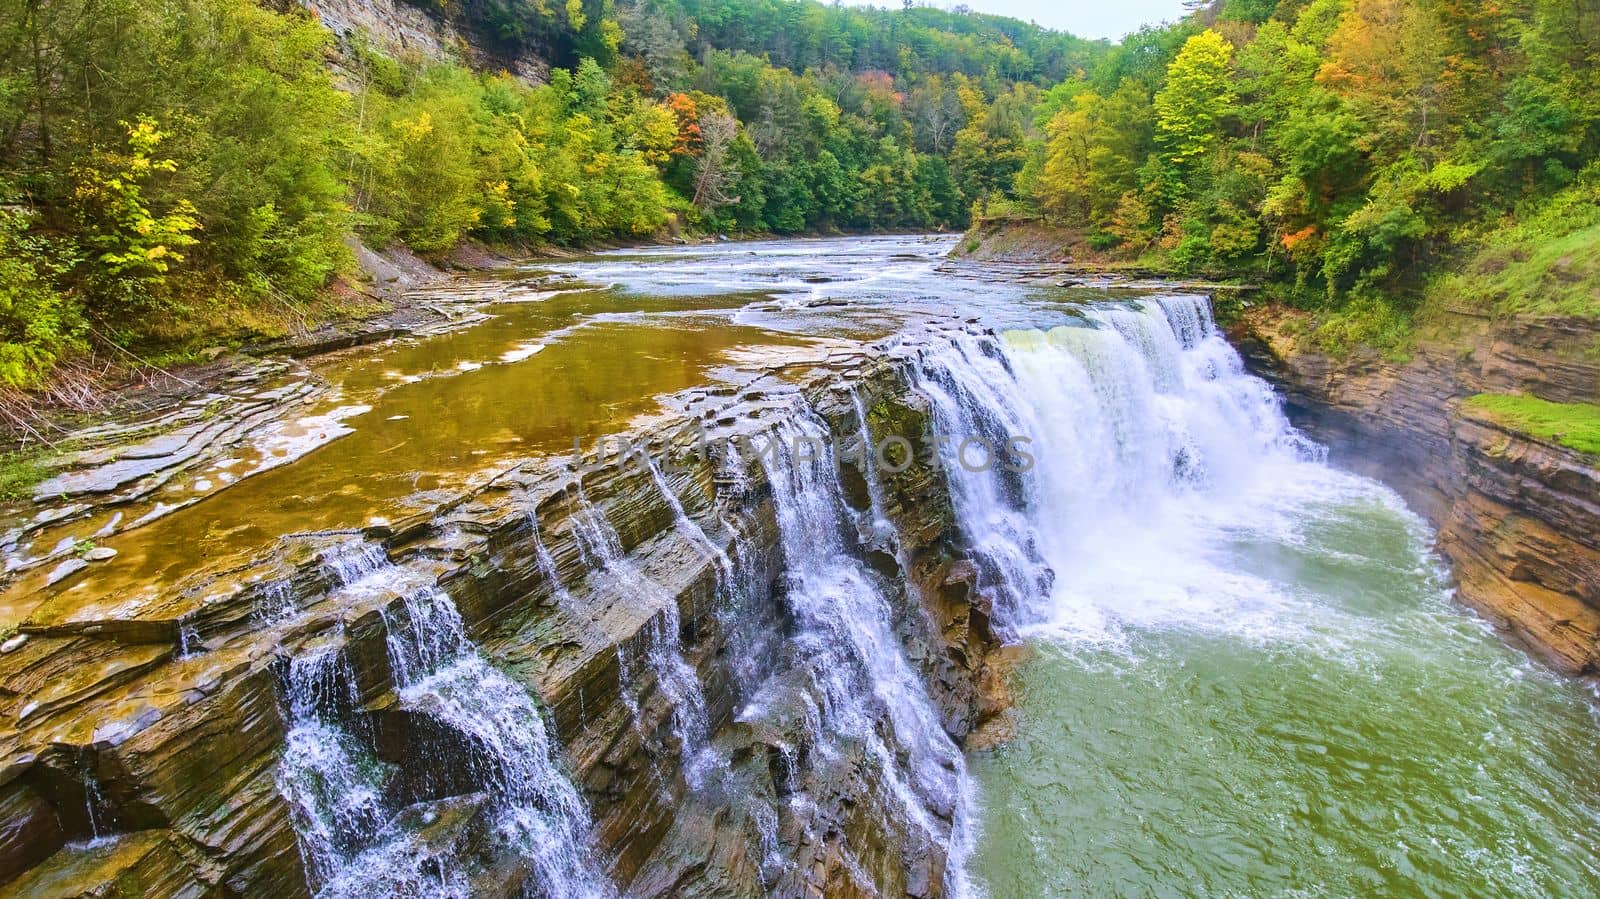 Image of Up close with drone to beautiful waterfall eroding cliffs with colorful forests around